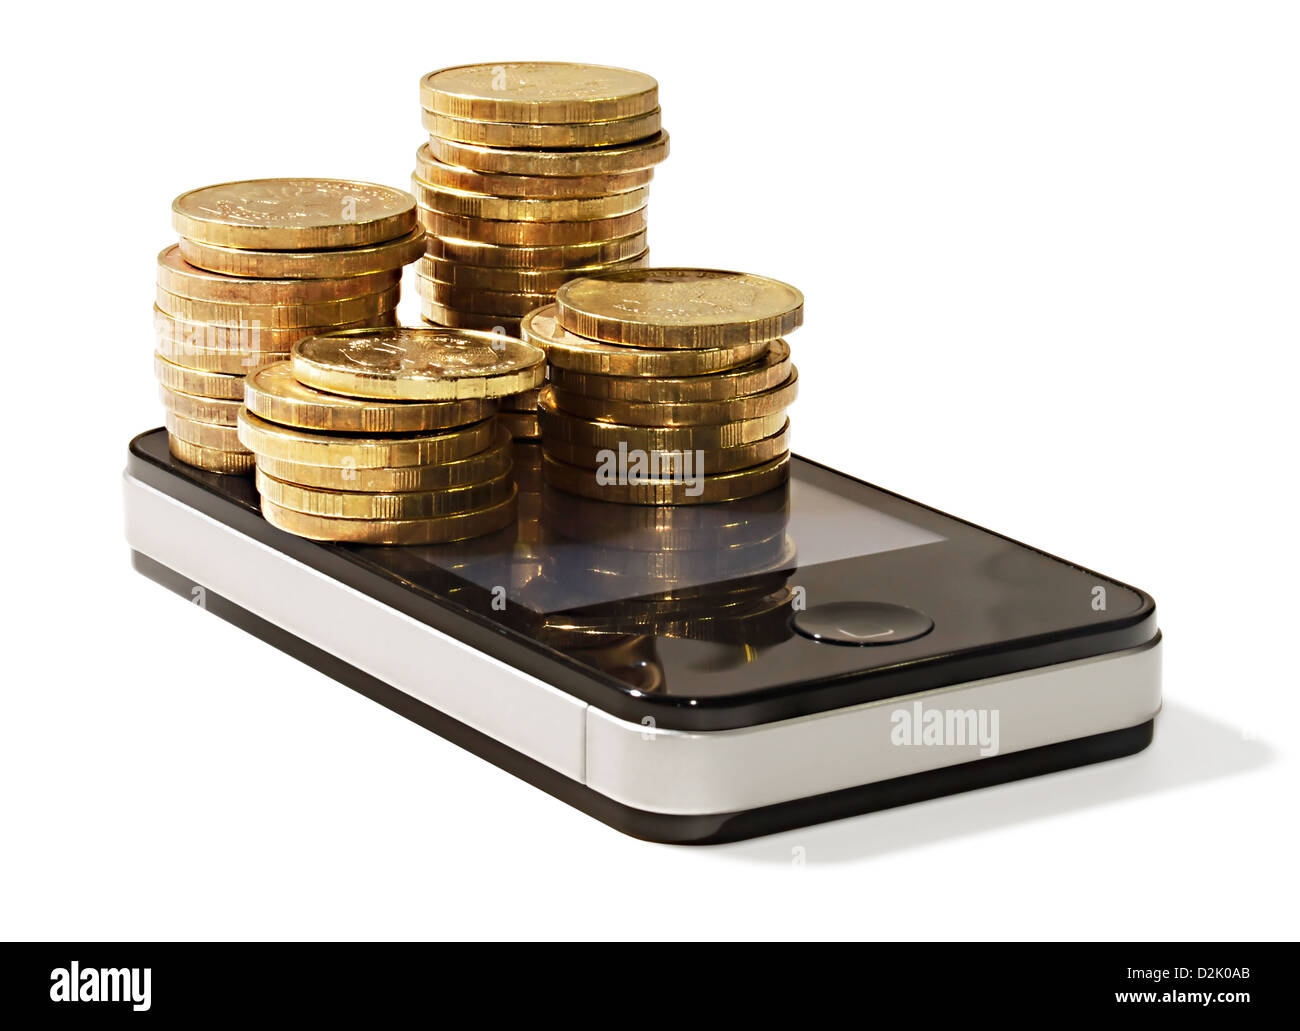 golden coins on cellular mobile phone Stock Photo